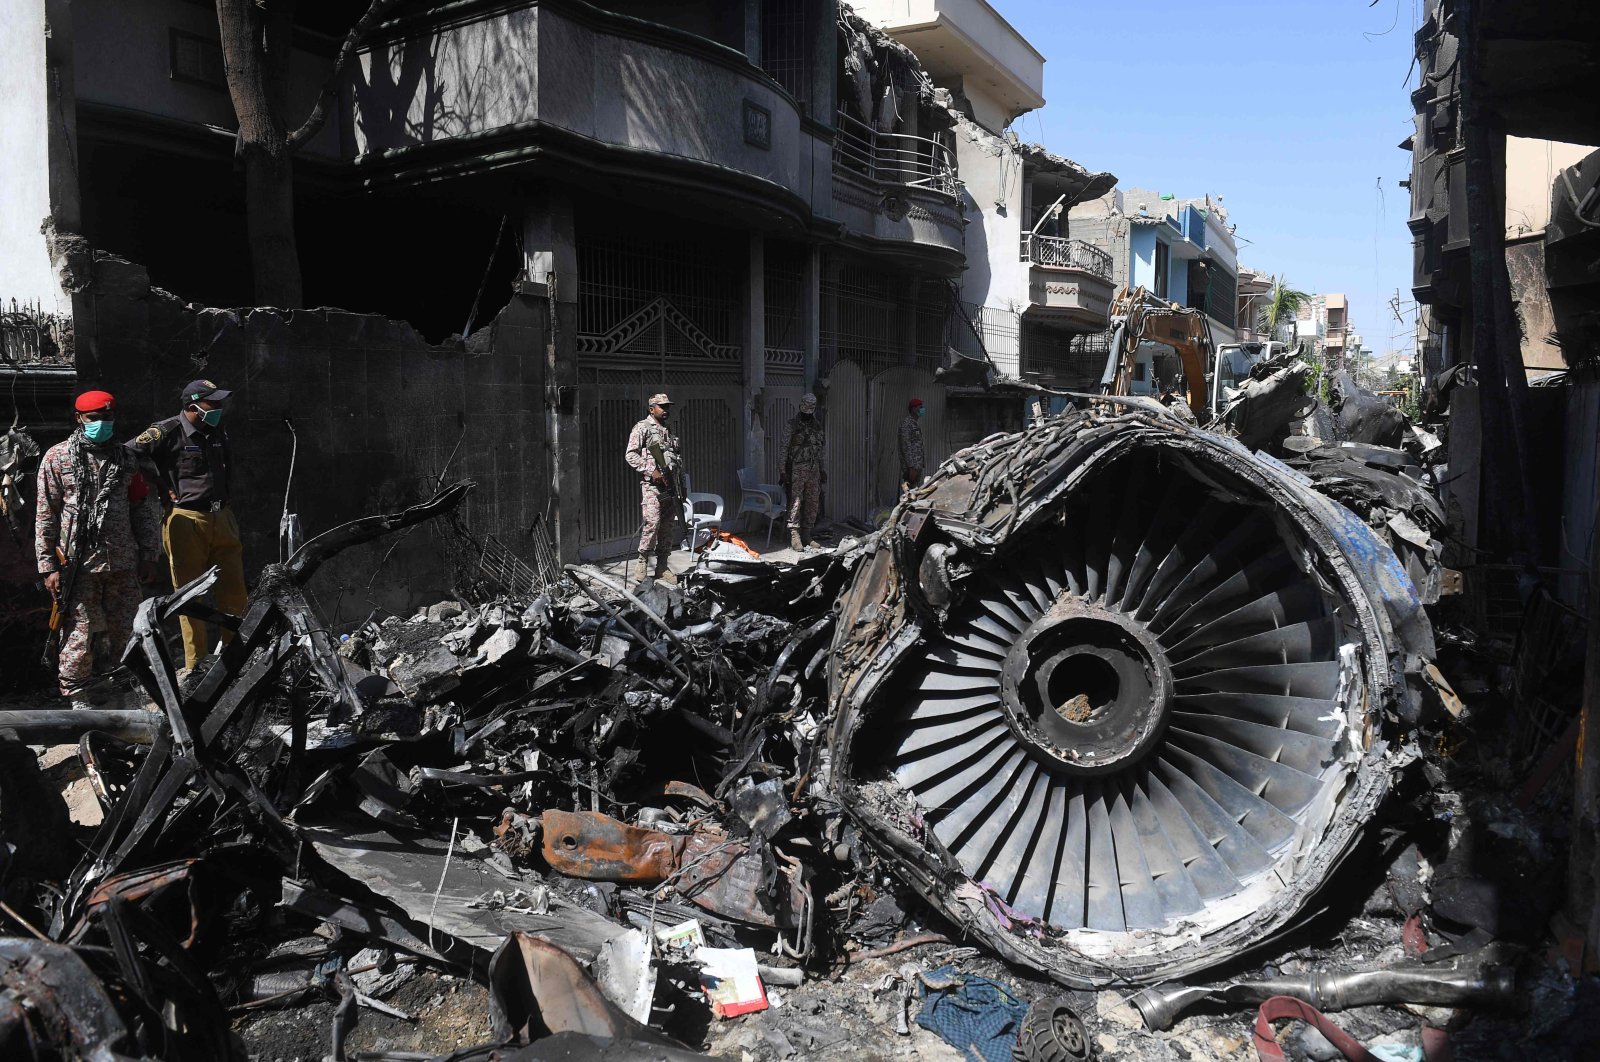 Security personnel stand beside the wreckage of a Pakistan International Airlines aircraft, in Karachi, Pakistan, May 24, 2020. (AFP Photo)